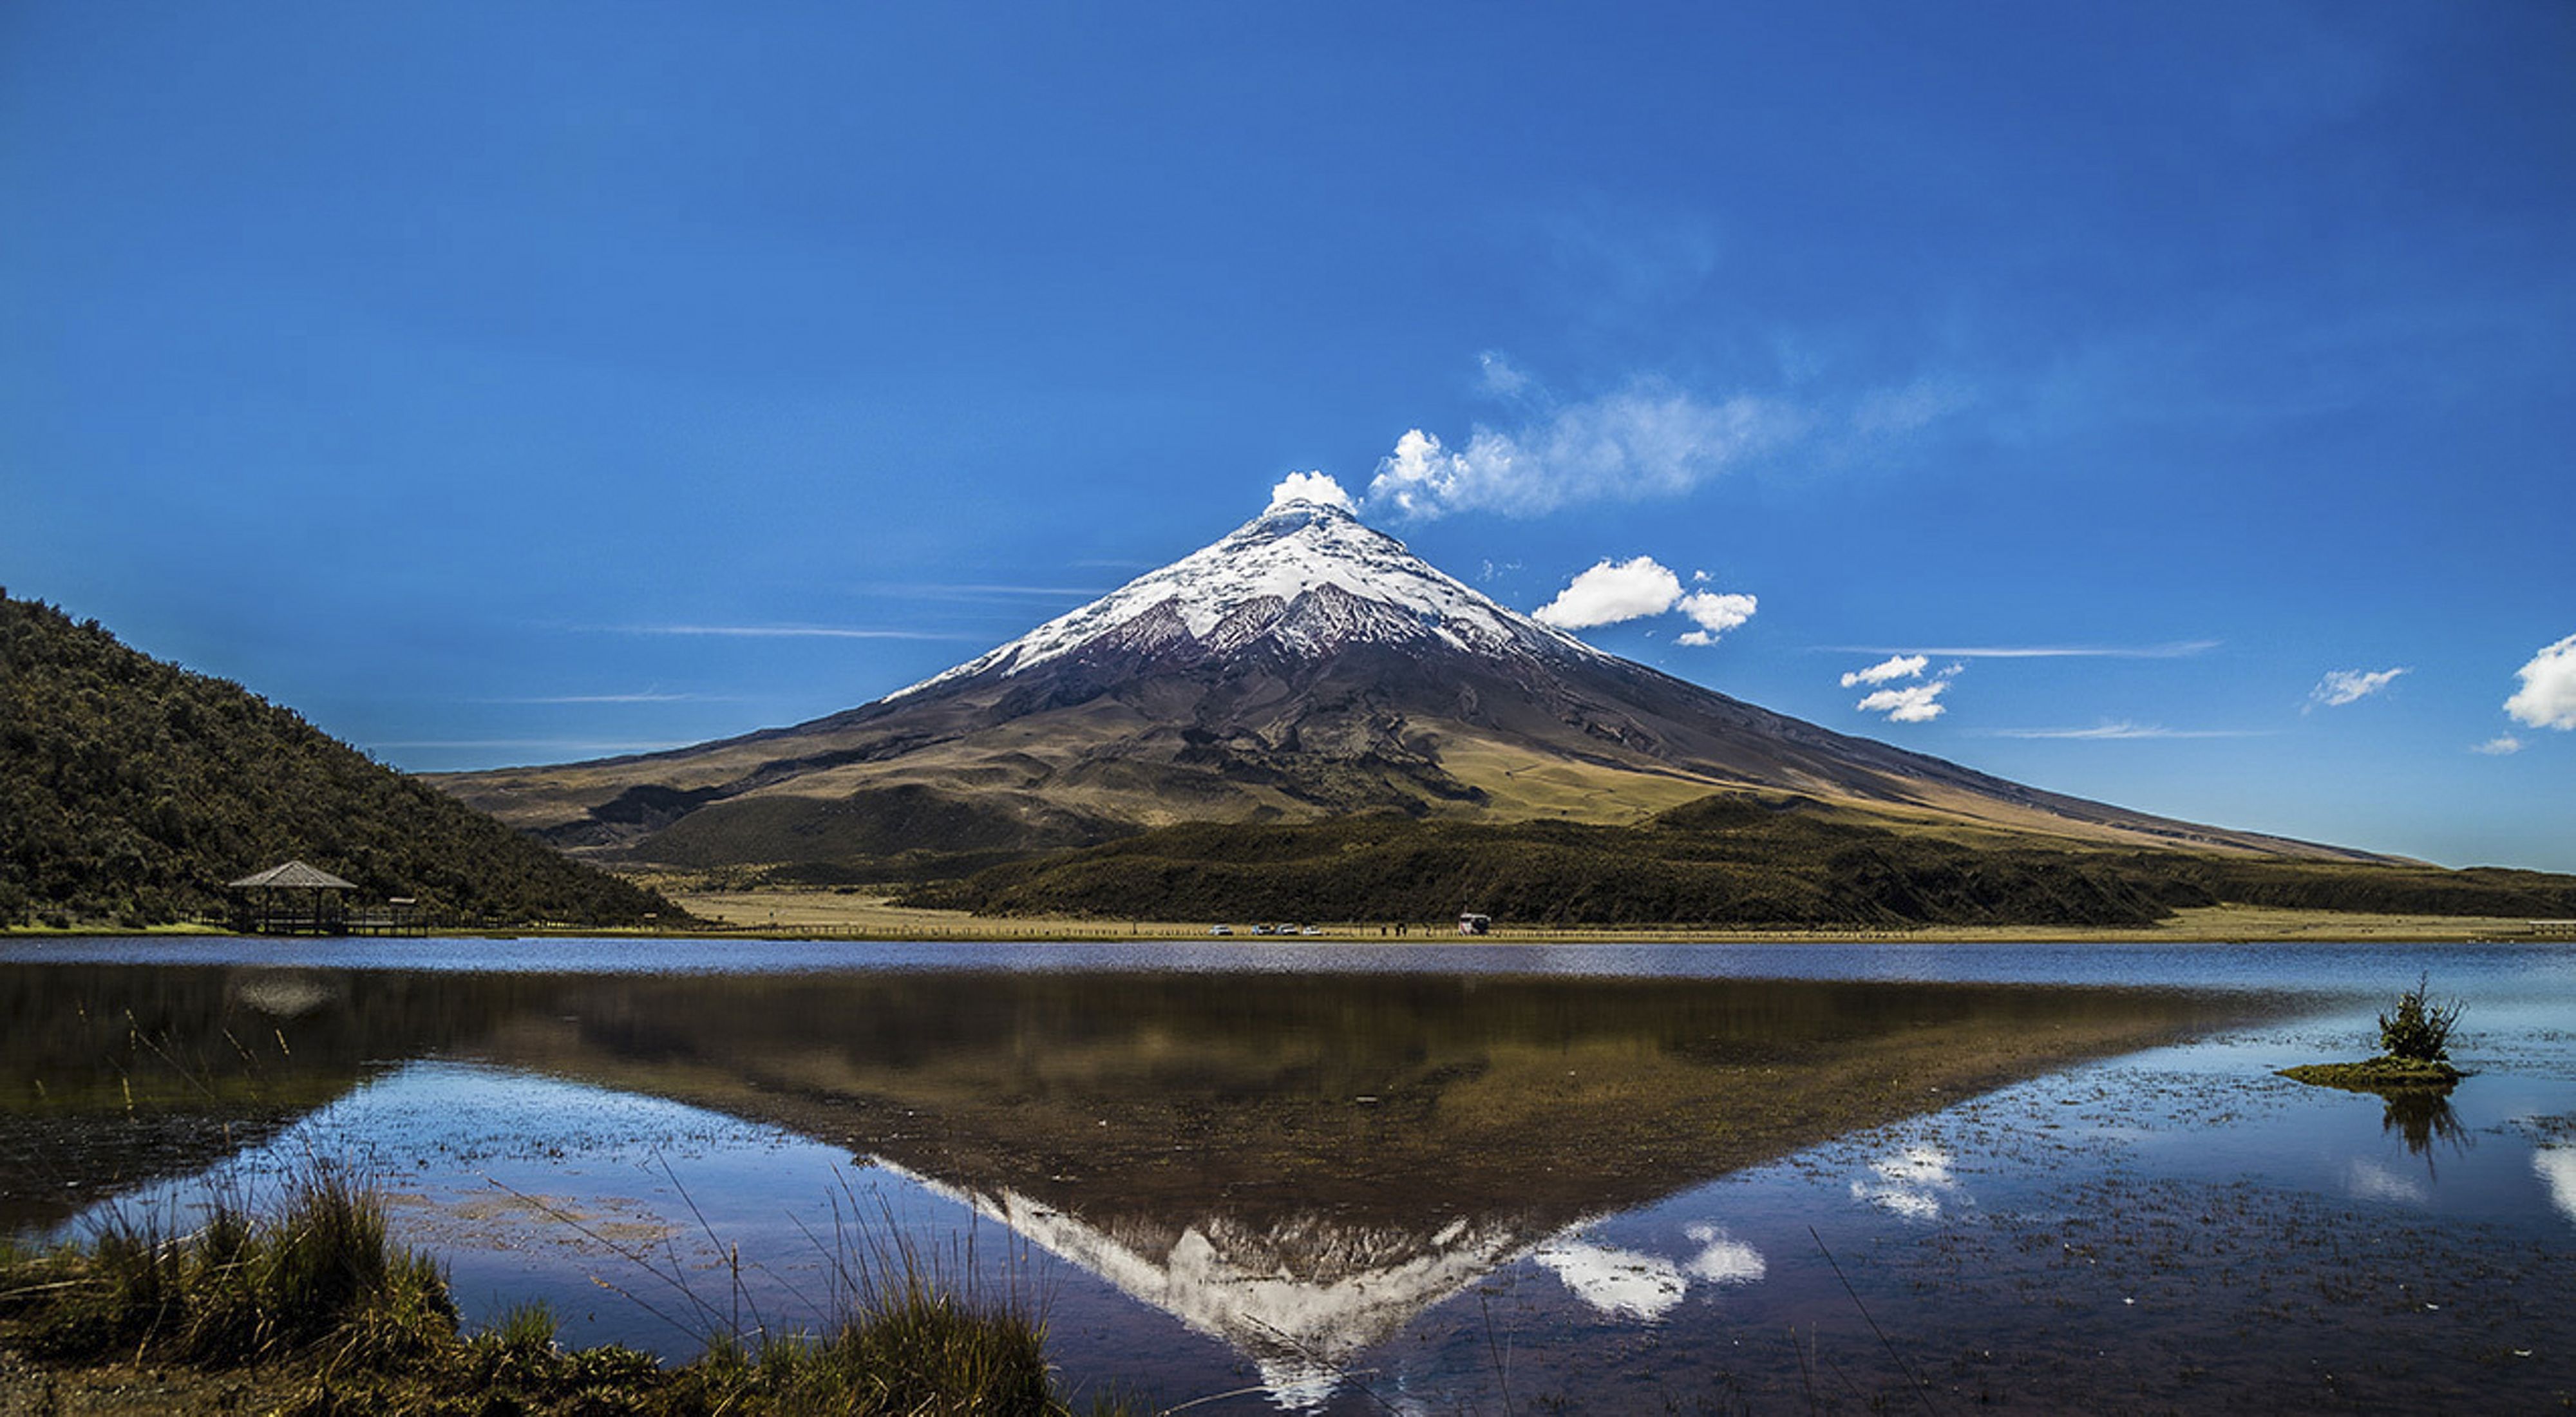 snow tipped volcano - Cotopaxi - beneath a bright blue sky and reflected in still lake water